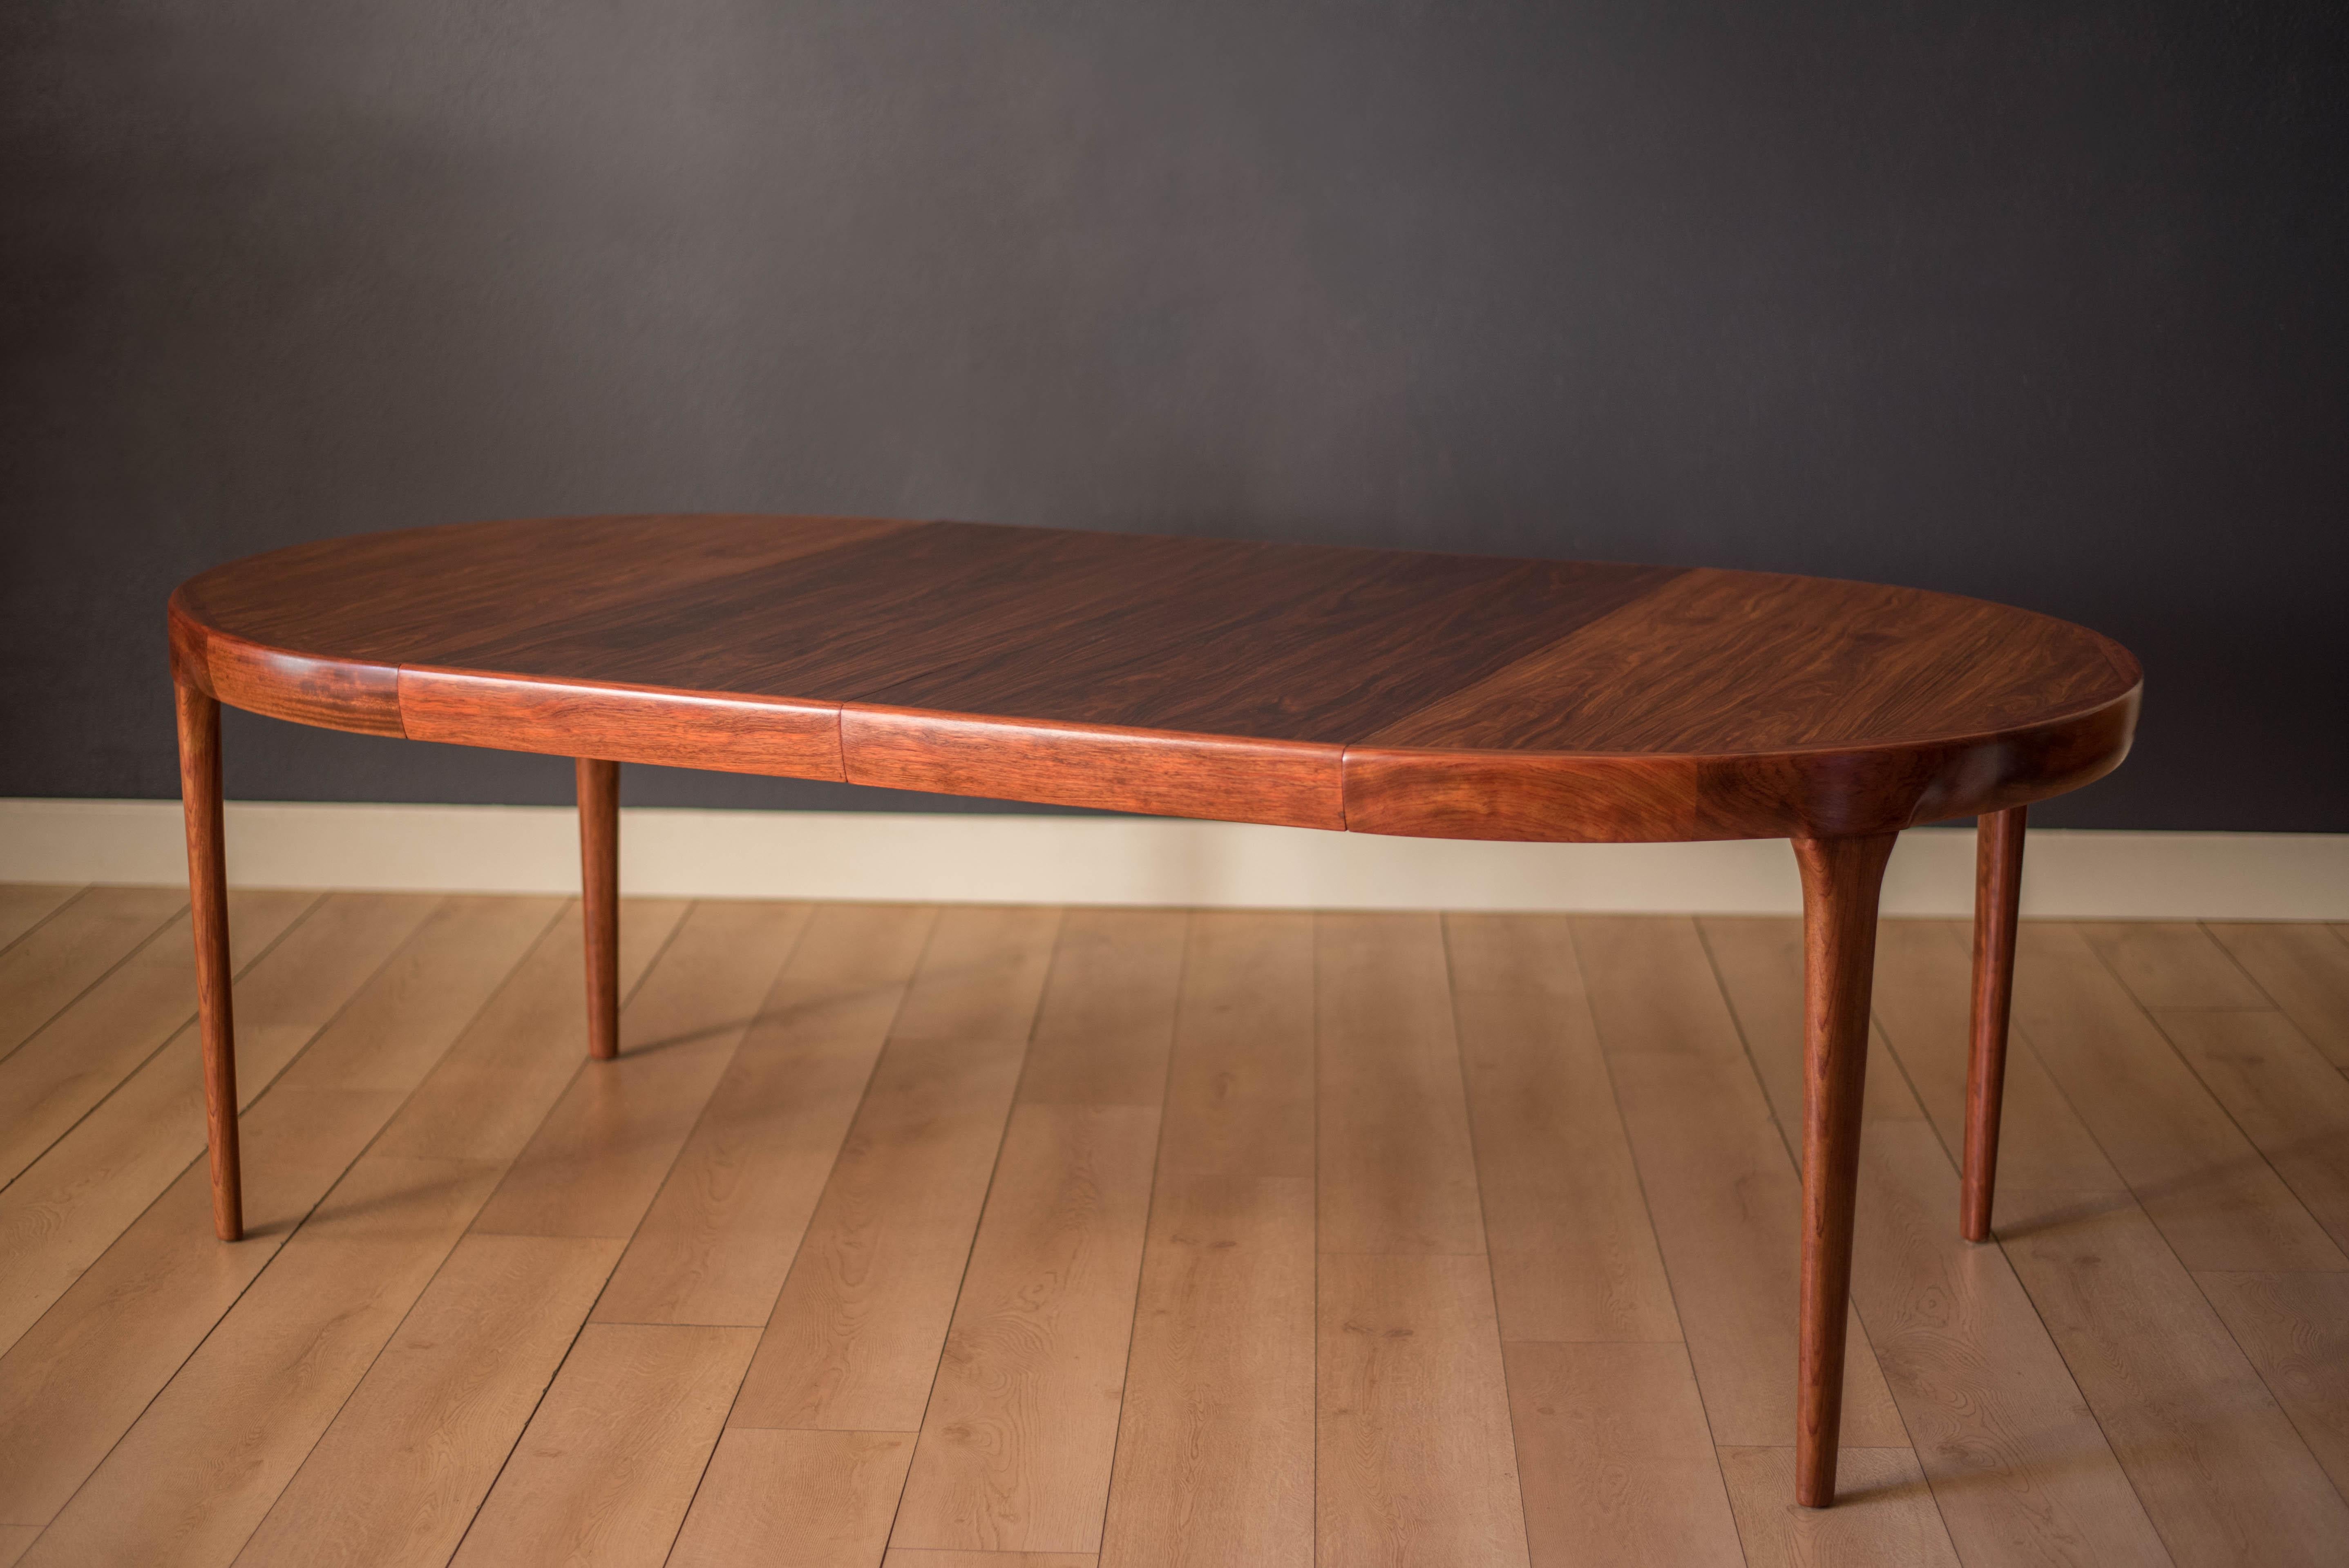 Mid-Century Modern dining table designed by Ib Kofod-Larsen for Faarup Møbelfabrik. This piece displays continuous Brazilian rosewood grains with solid edge banding and a seamless sculpted apron. The table extends with two leaves that can fit up to